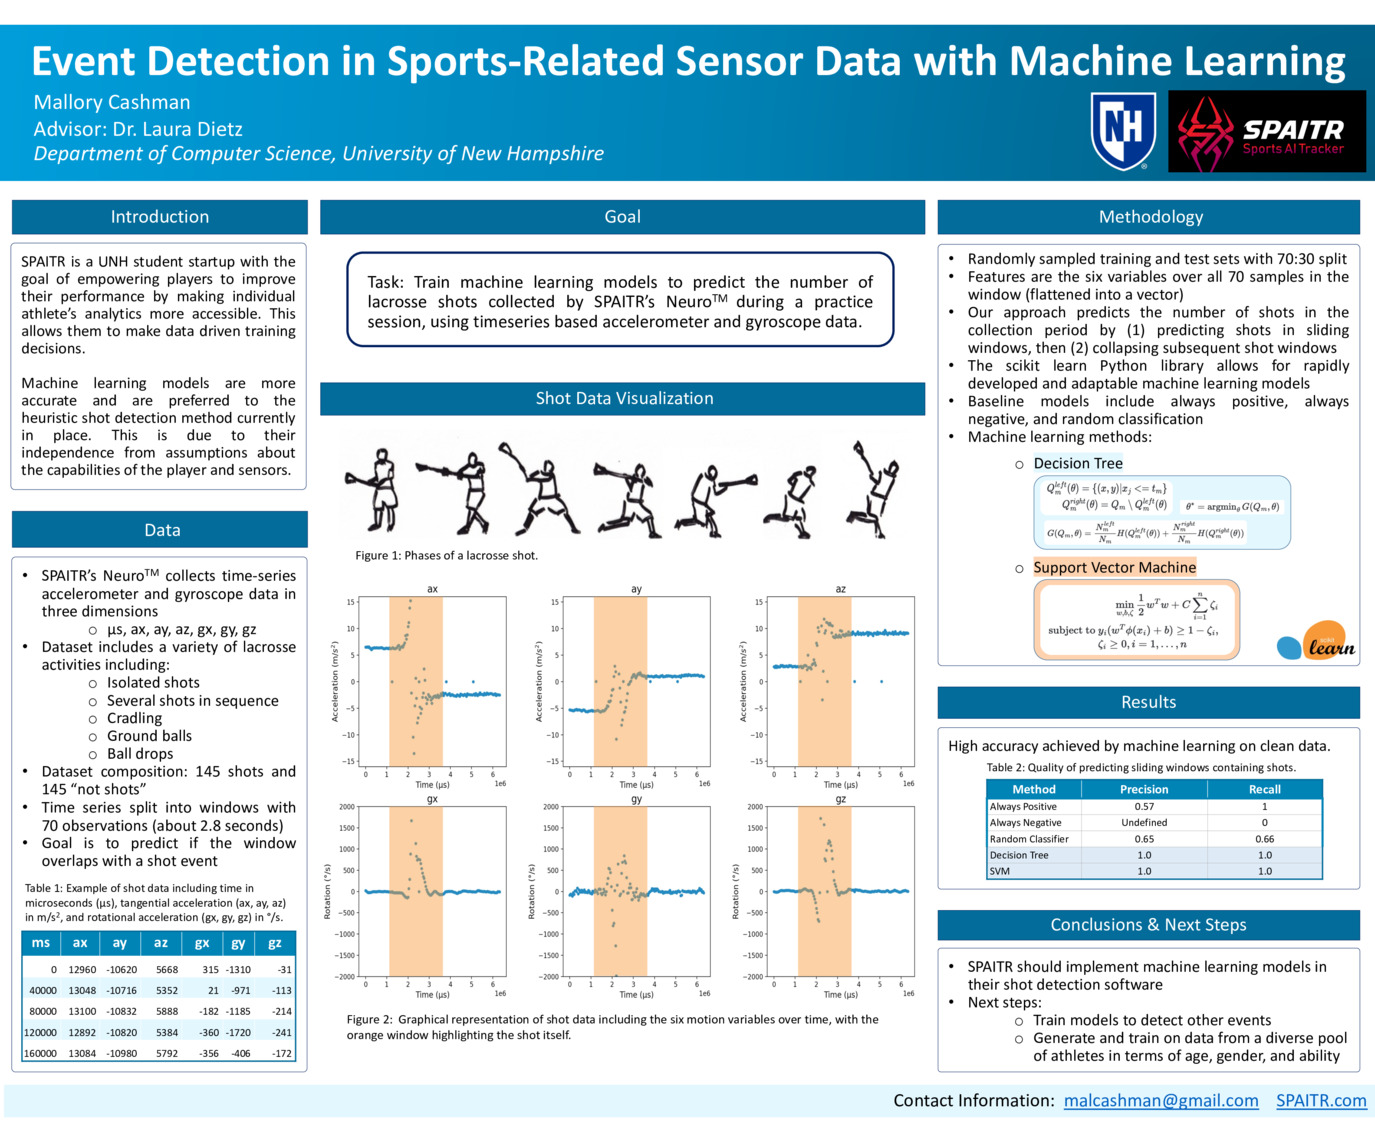 Spaitr: Event Detection In Sports-Related Sensor Data With Machine Learning by mmc1070